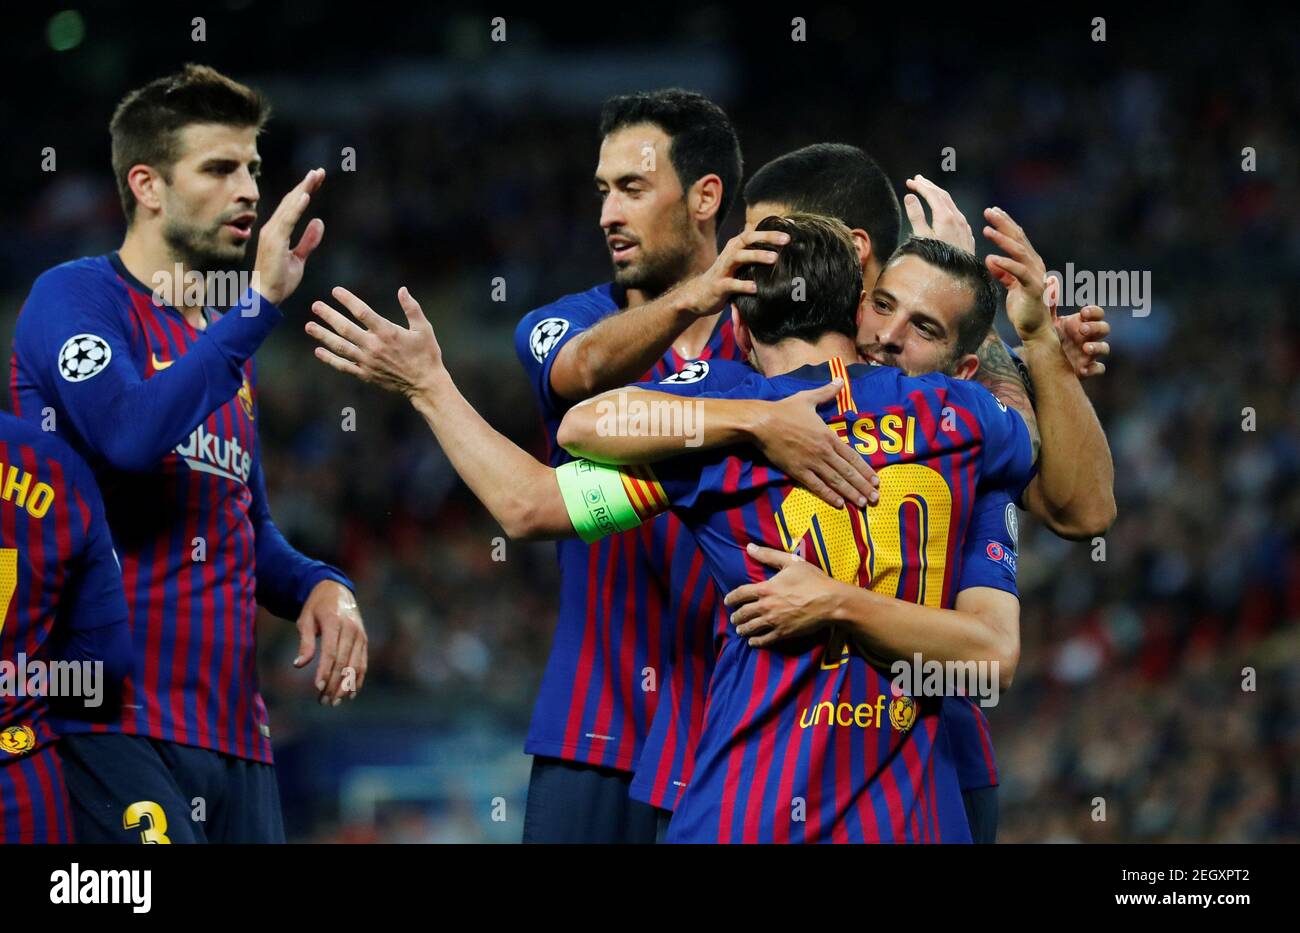 Soccer Football - Champions League - Group Stage - Group B - Tottenham Hotspur v FC Barcelona - Wembley Stadium, London, Britain - October 3, 2018  Barcelona's Lionel Messi celebrates scoring their third goal with team mates      REUTERS/Eddie Keogh Stock Photo